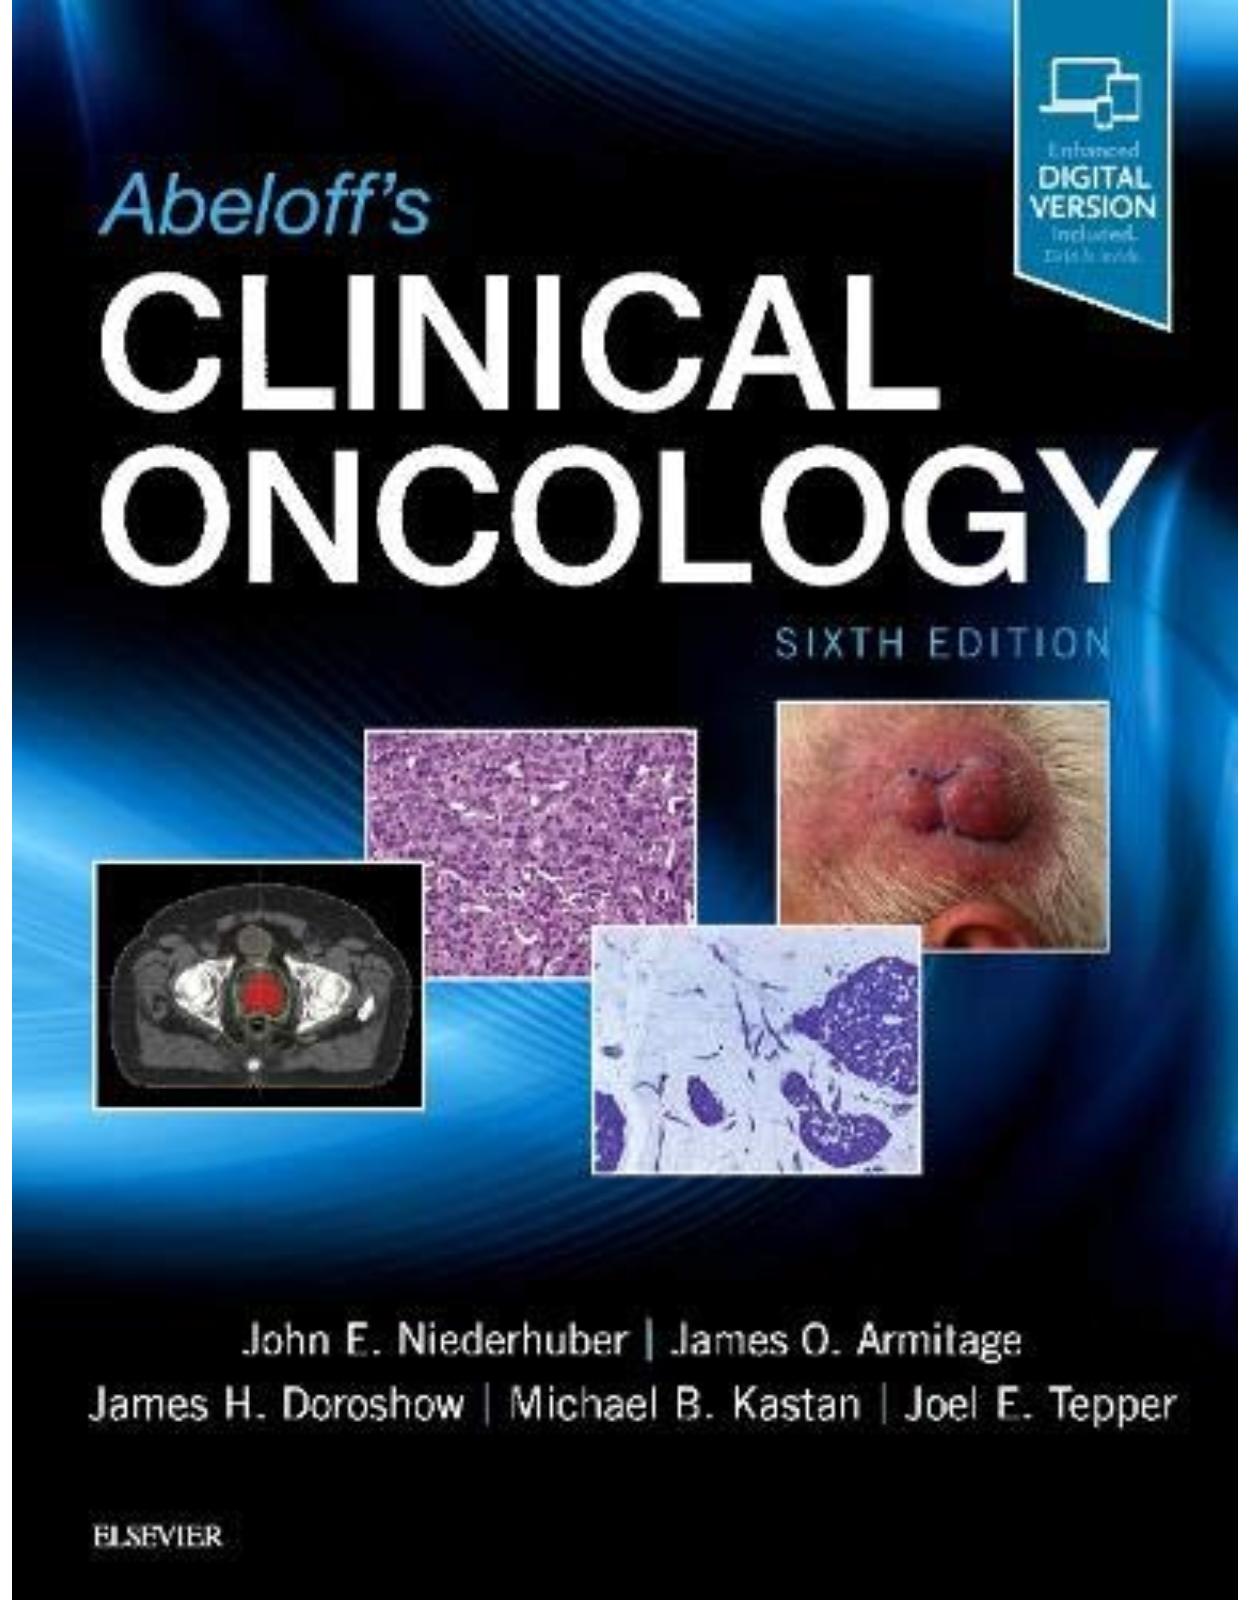 Abeloff’s Clinical Oncology